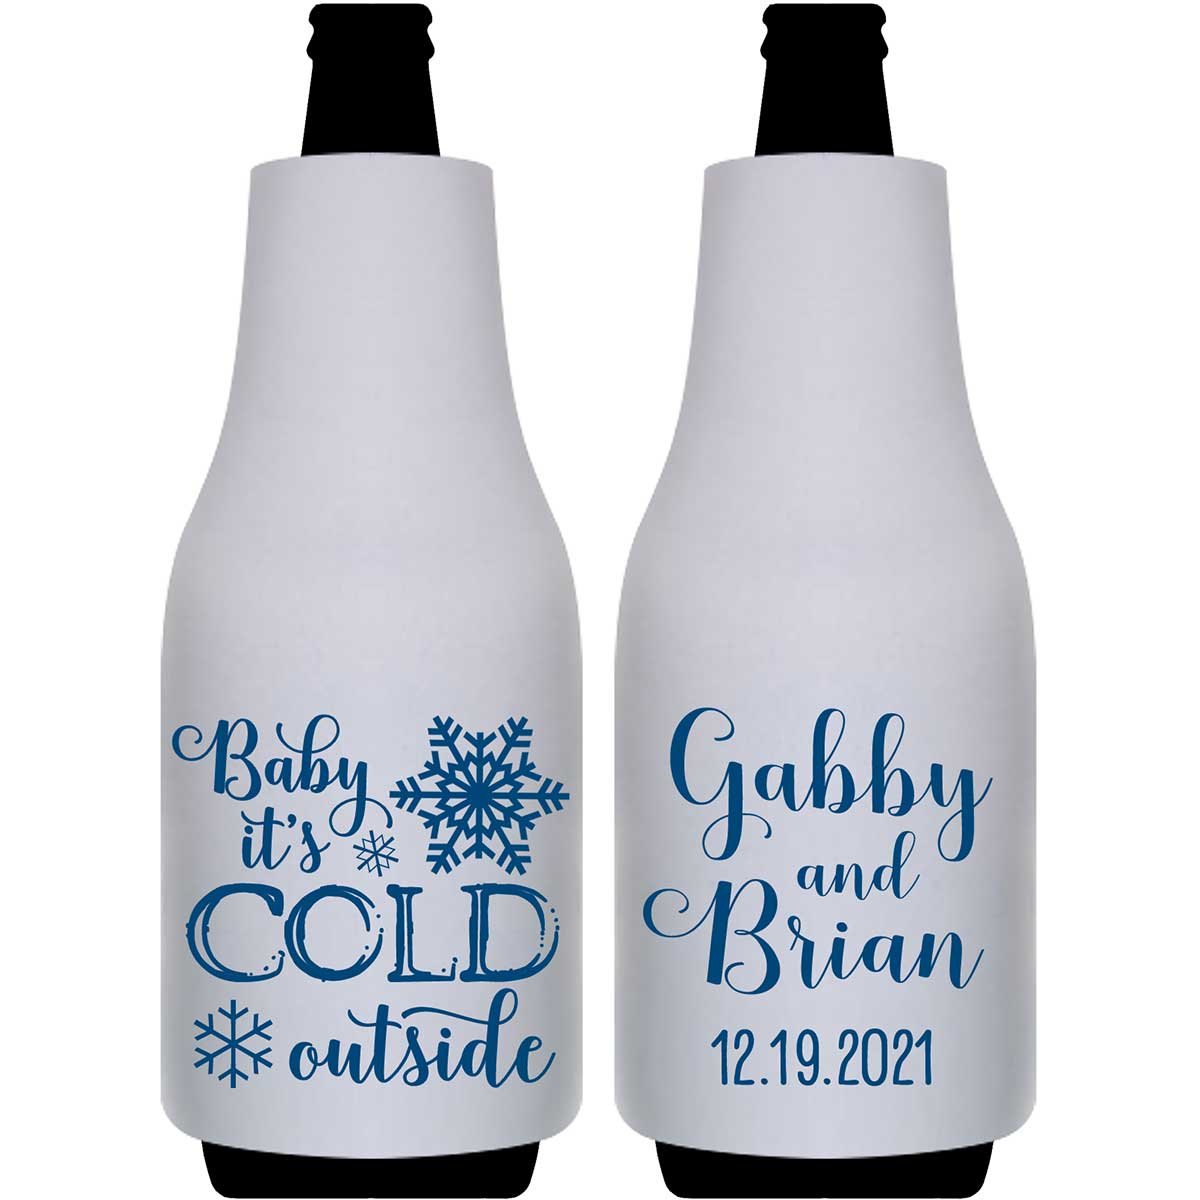 Baby It's Cold Outside 1A Foldable Bottle Sleeve Koozies Wedding Gifts for Guests